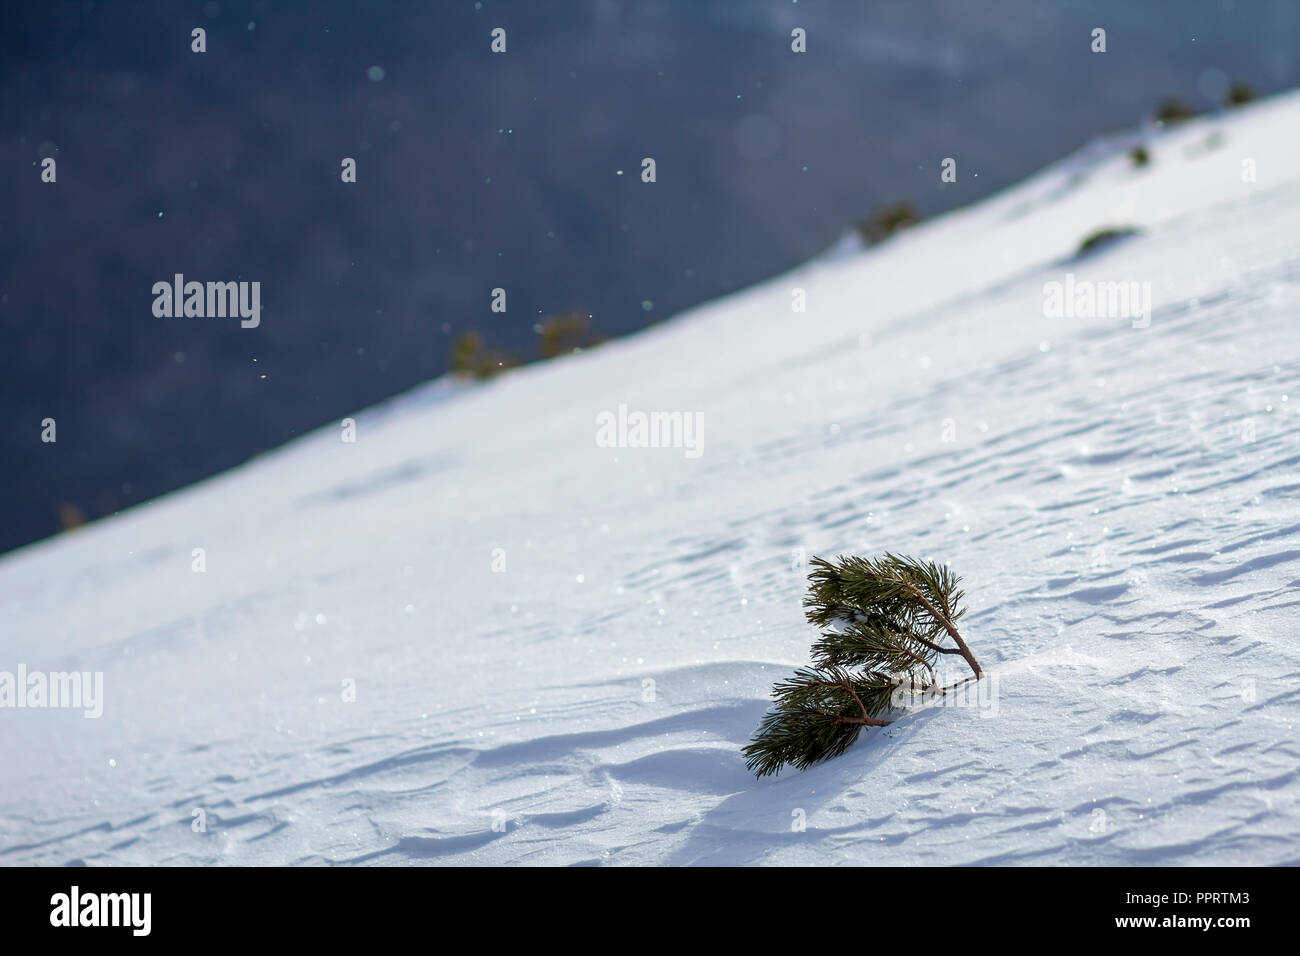 Small pine tree on snow covered hill in winter mountains Stock Photo